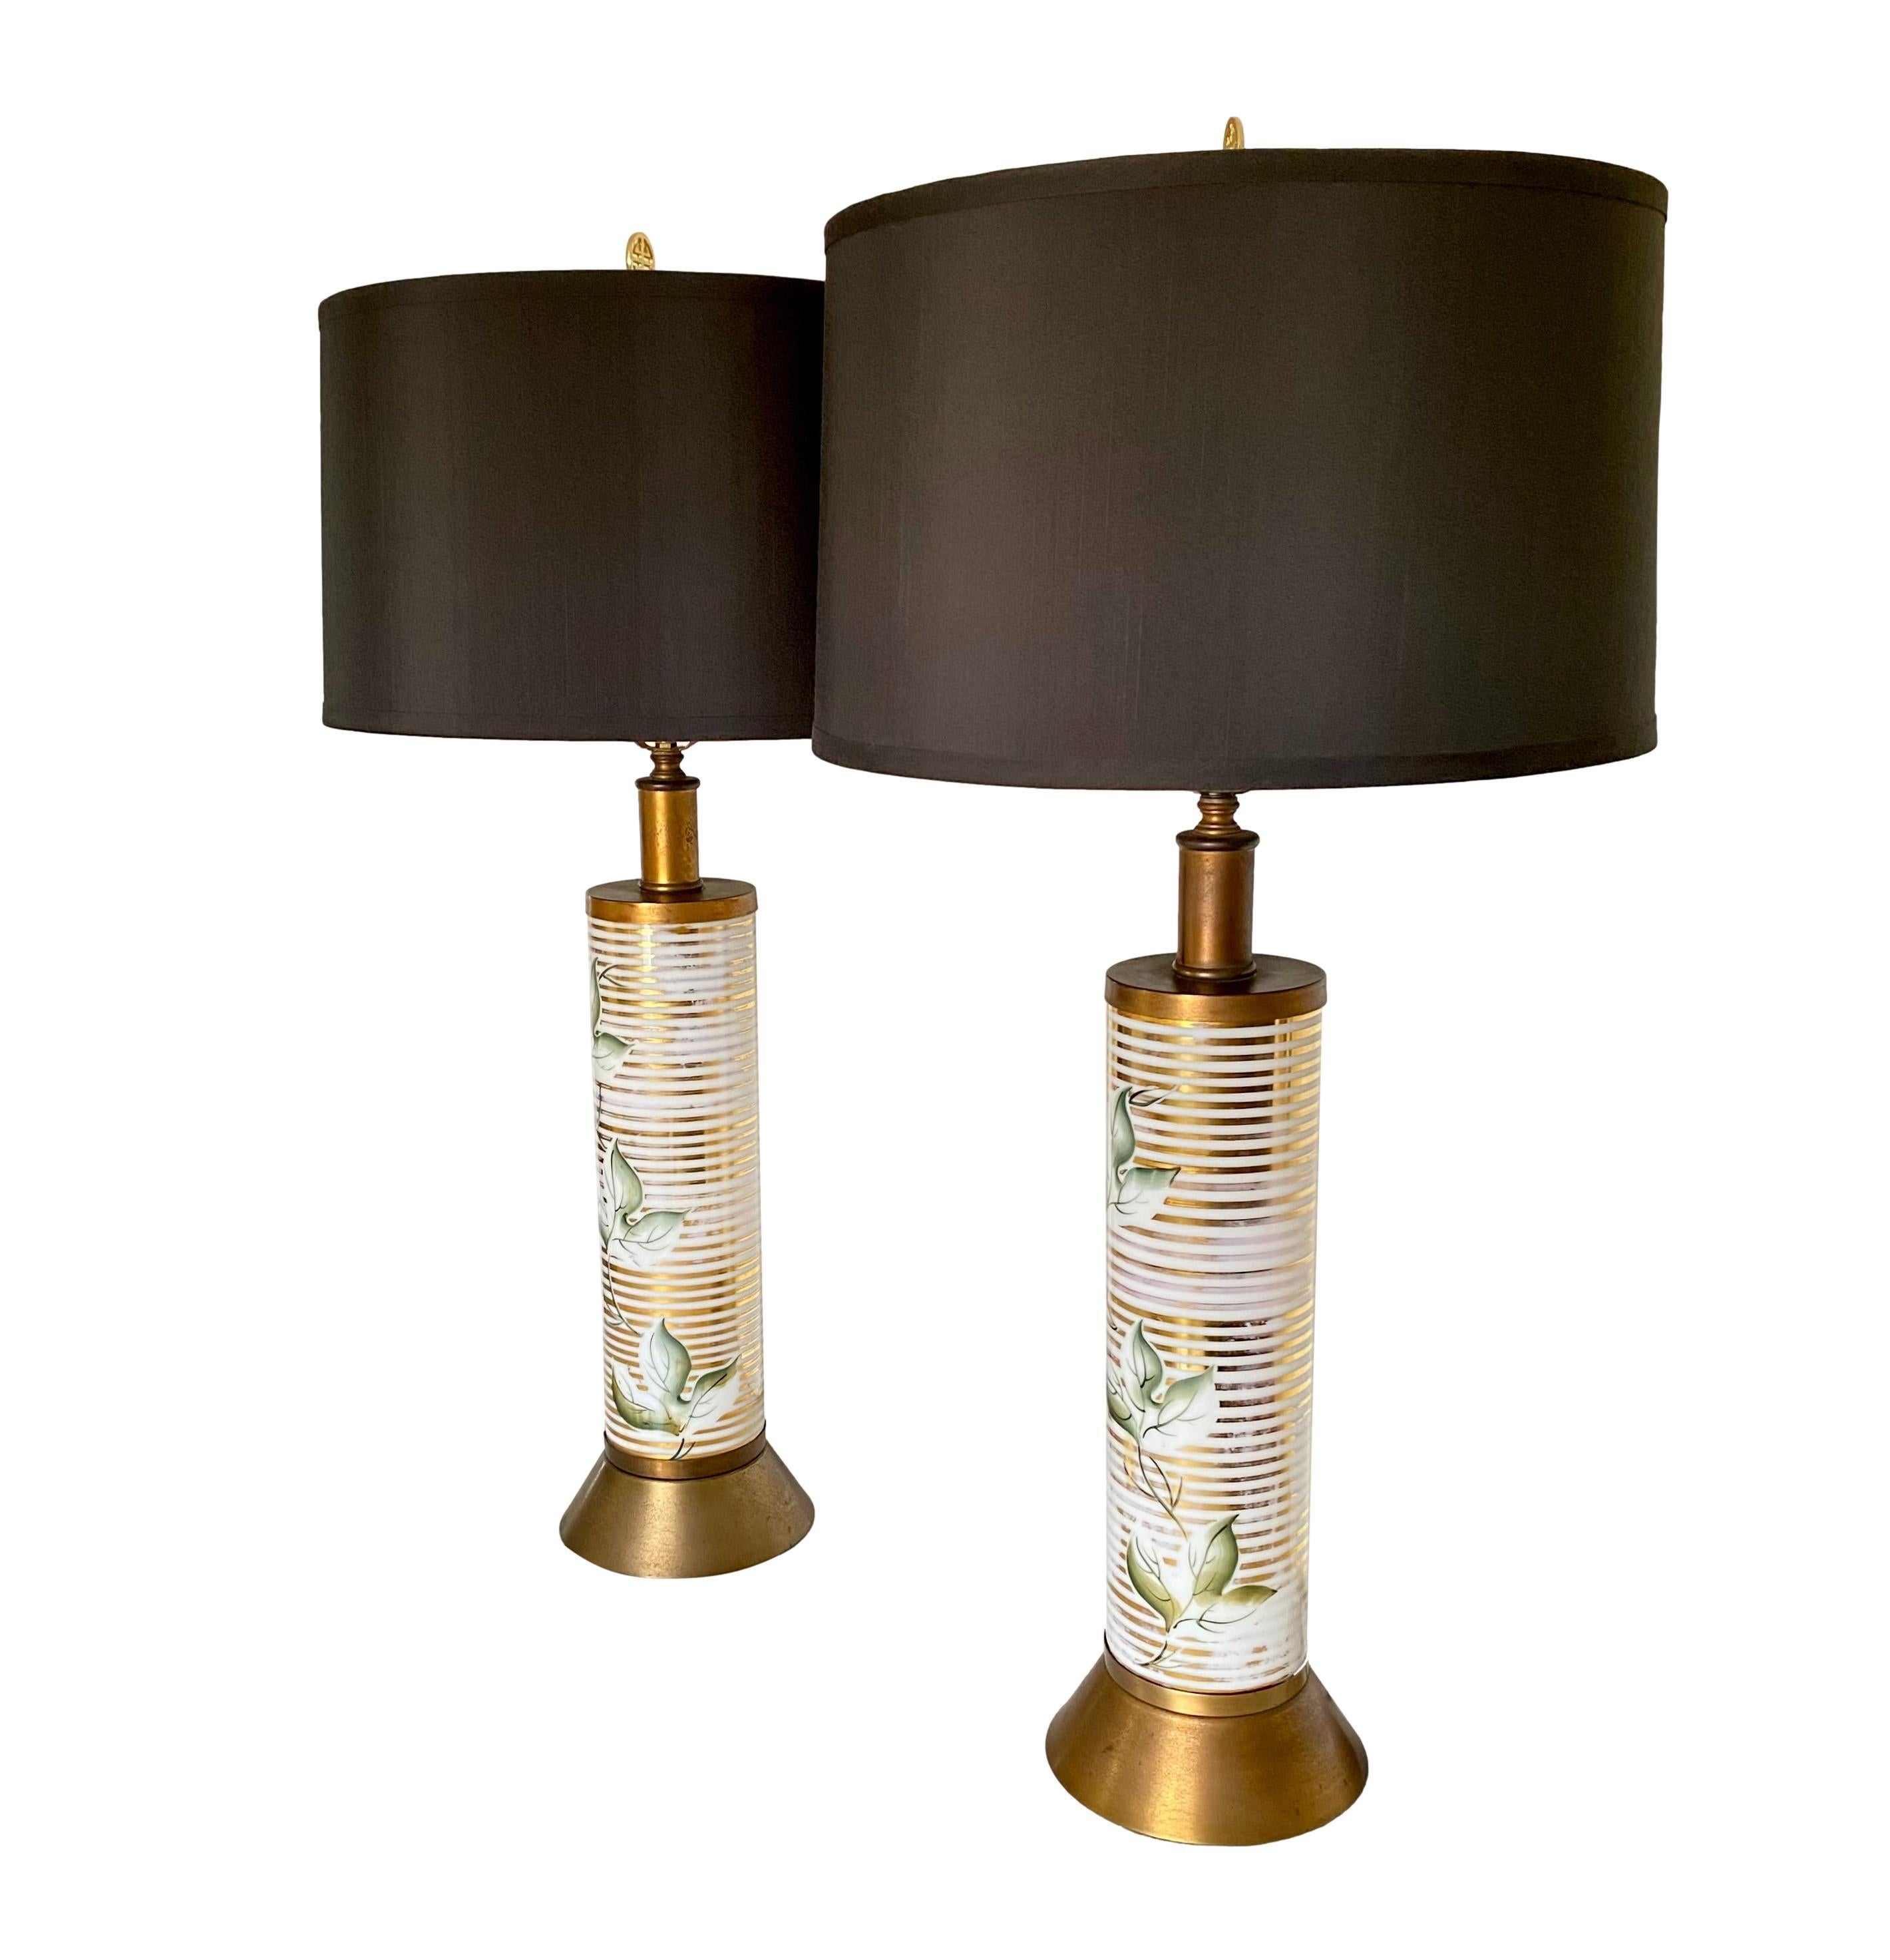 A vintage 1960's pair of ceramic pillar lamps in good working condition with black silk-blend drum lamp shades. Hand painted foliate motif over horizontal bands of gold leaf with brass base/details and Asian style medallion finial.

Dimensions: